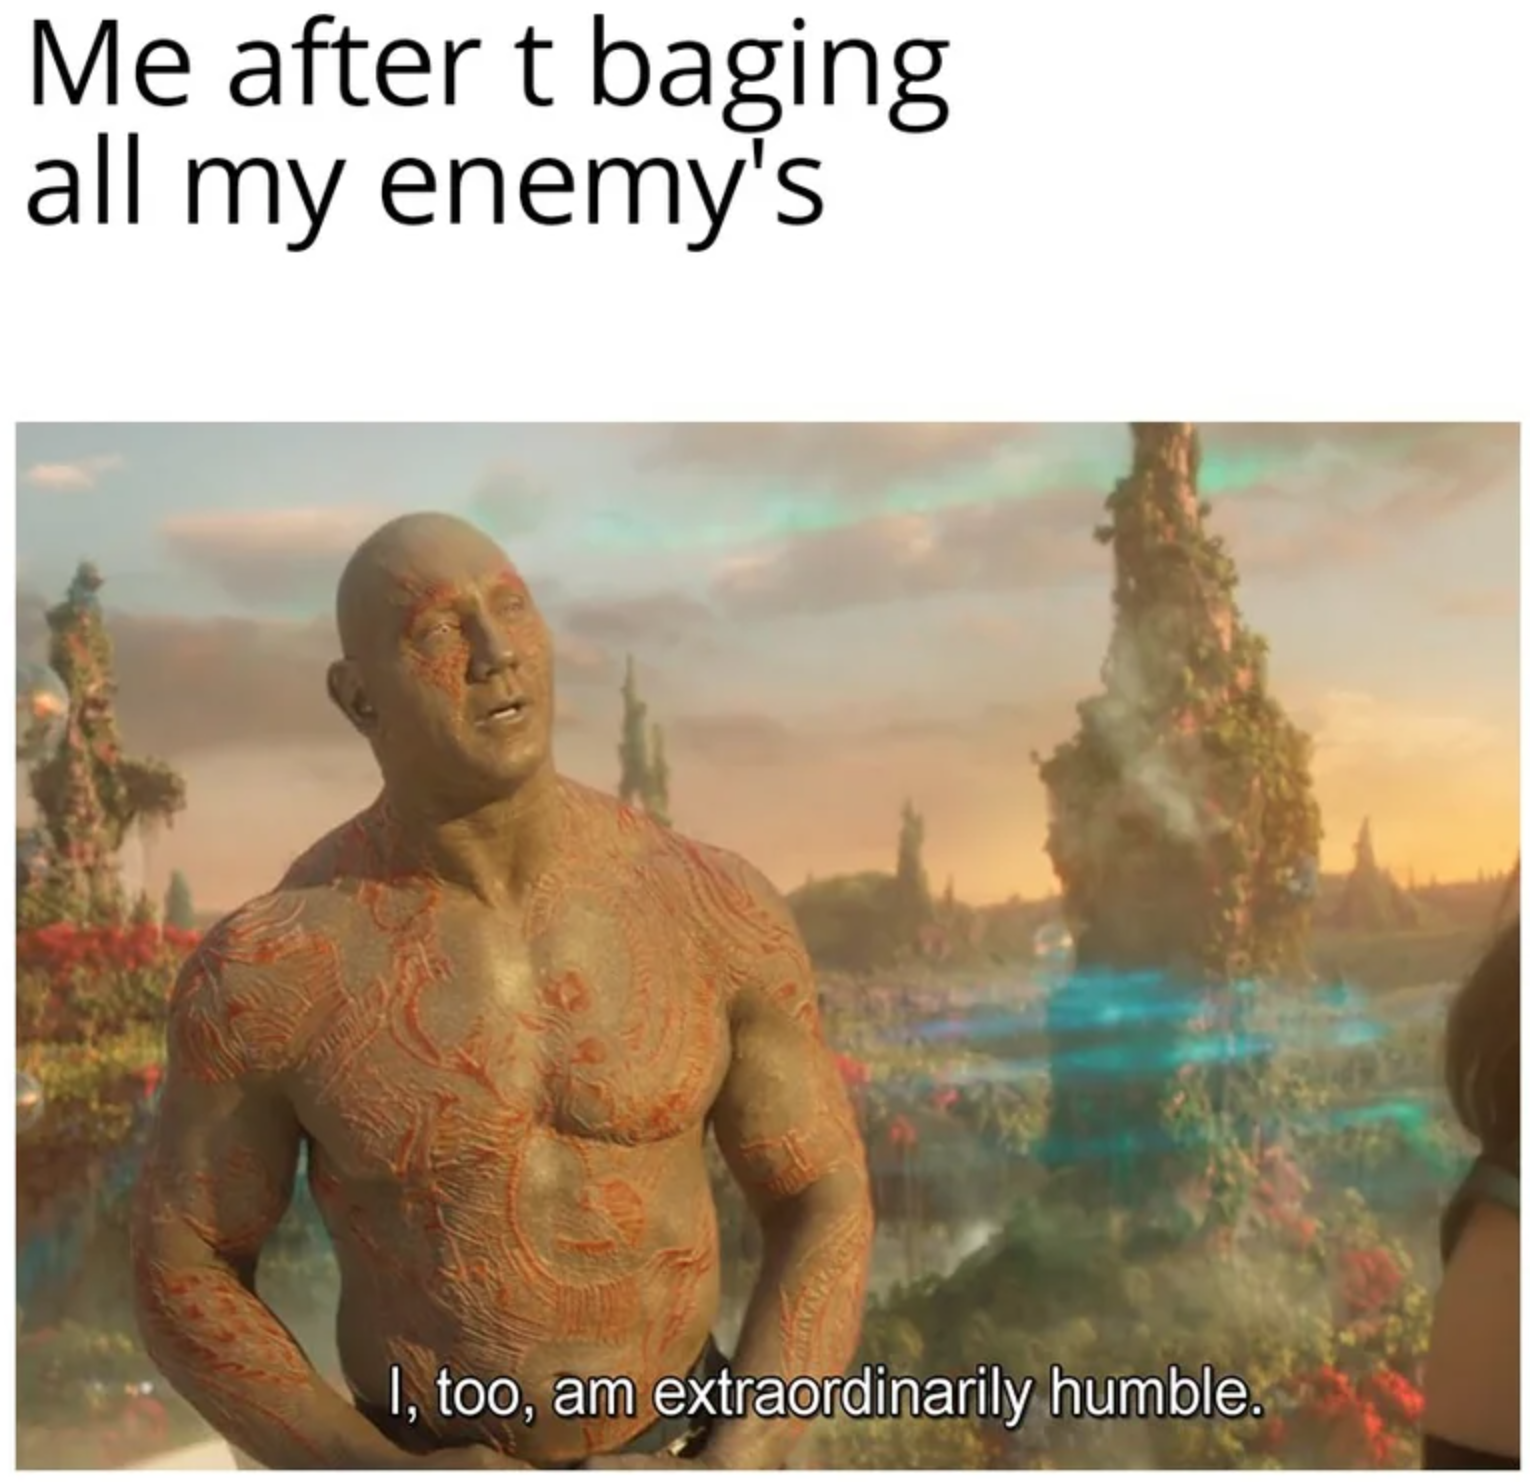 funny gaming memes  - sigma male meme - Me after t baging all my enemy's I, too, am extraordinarily humble.